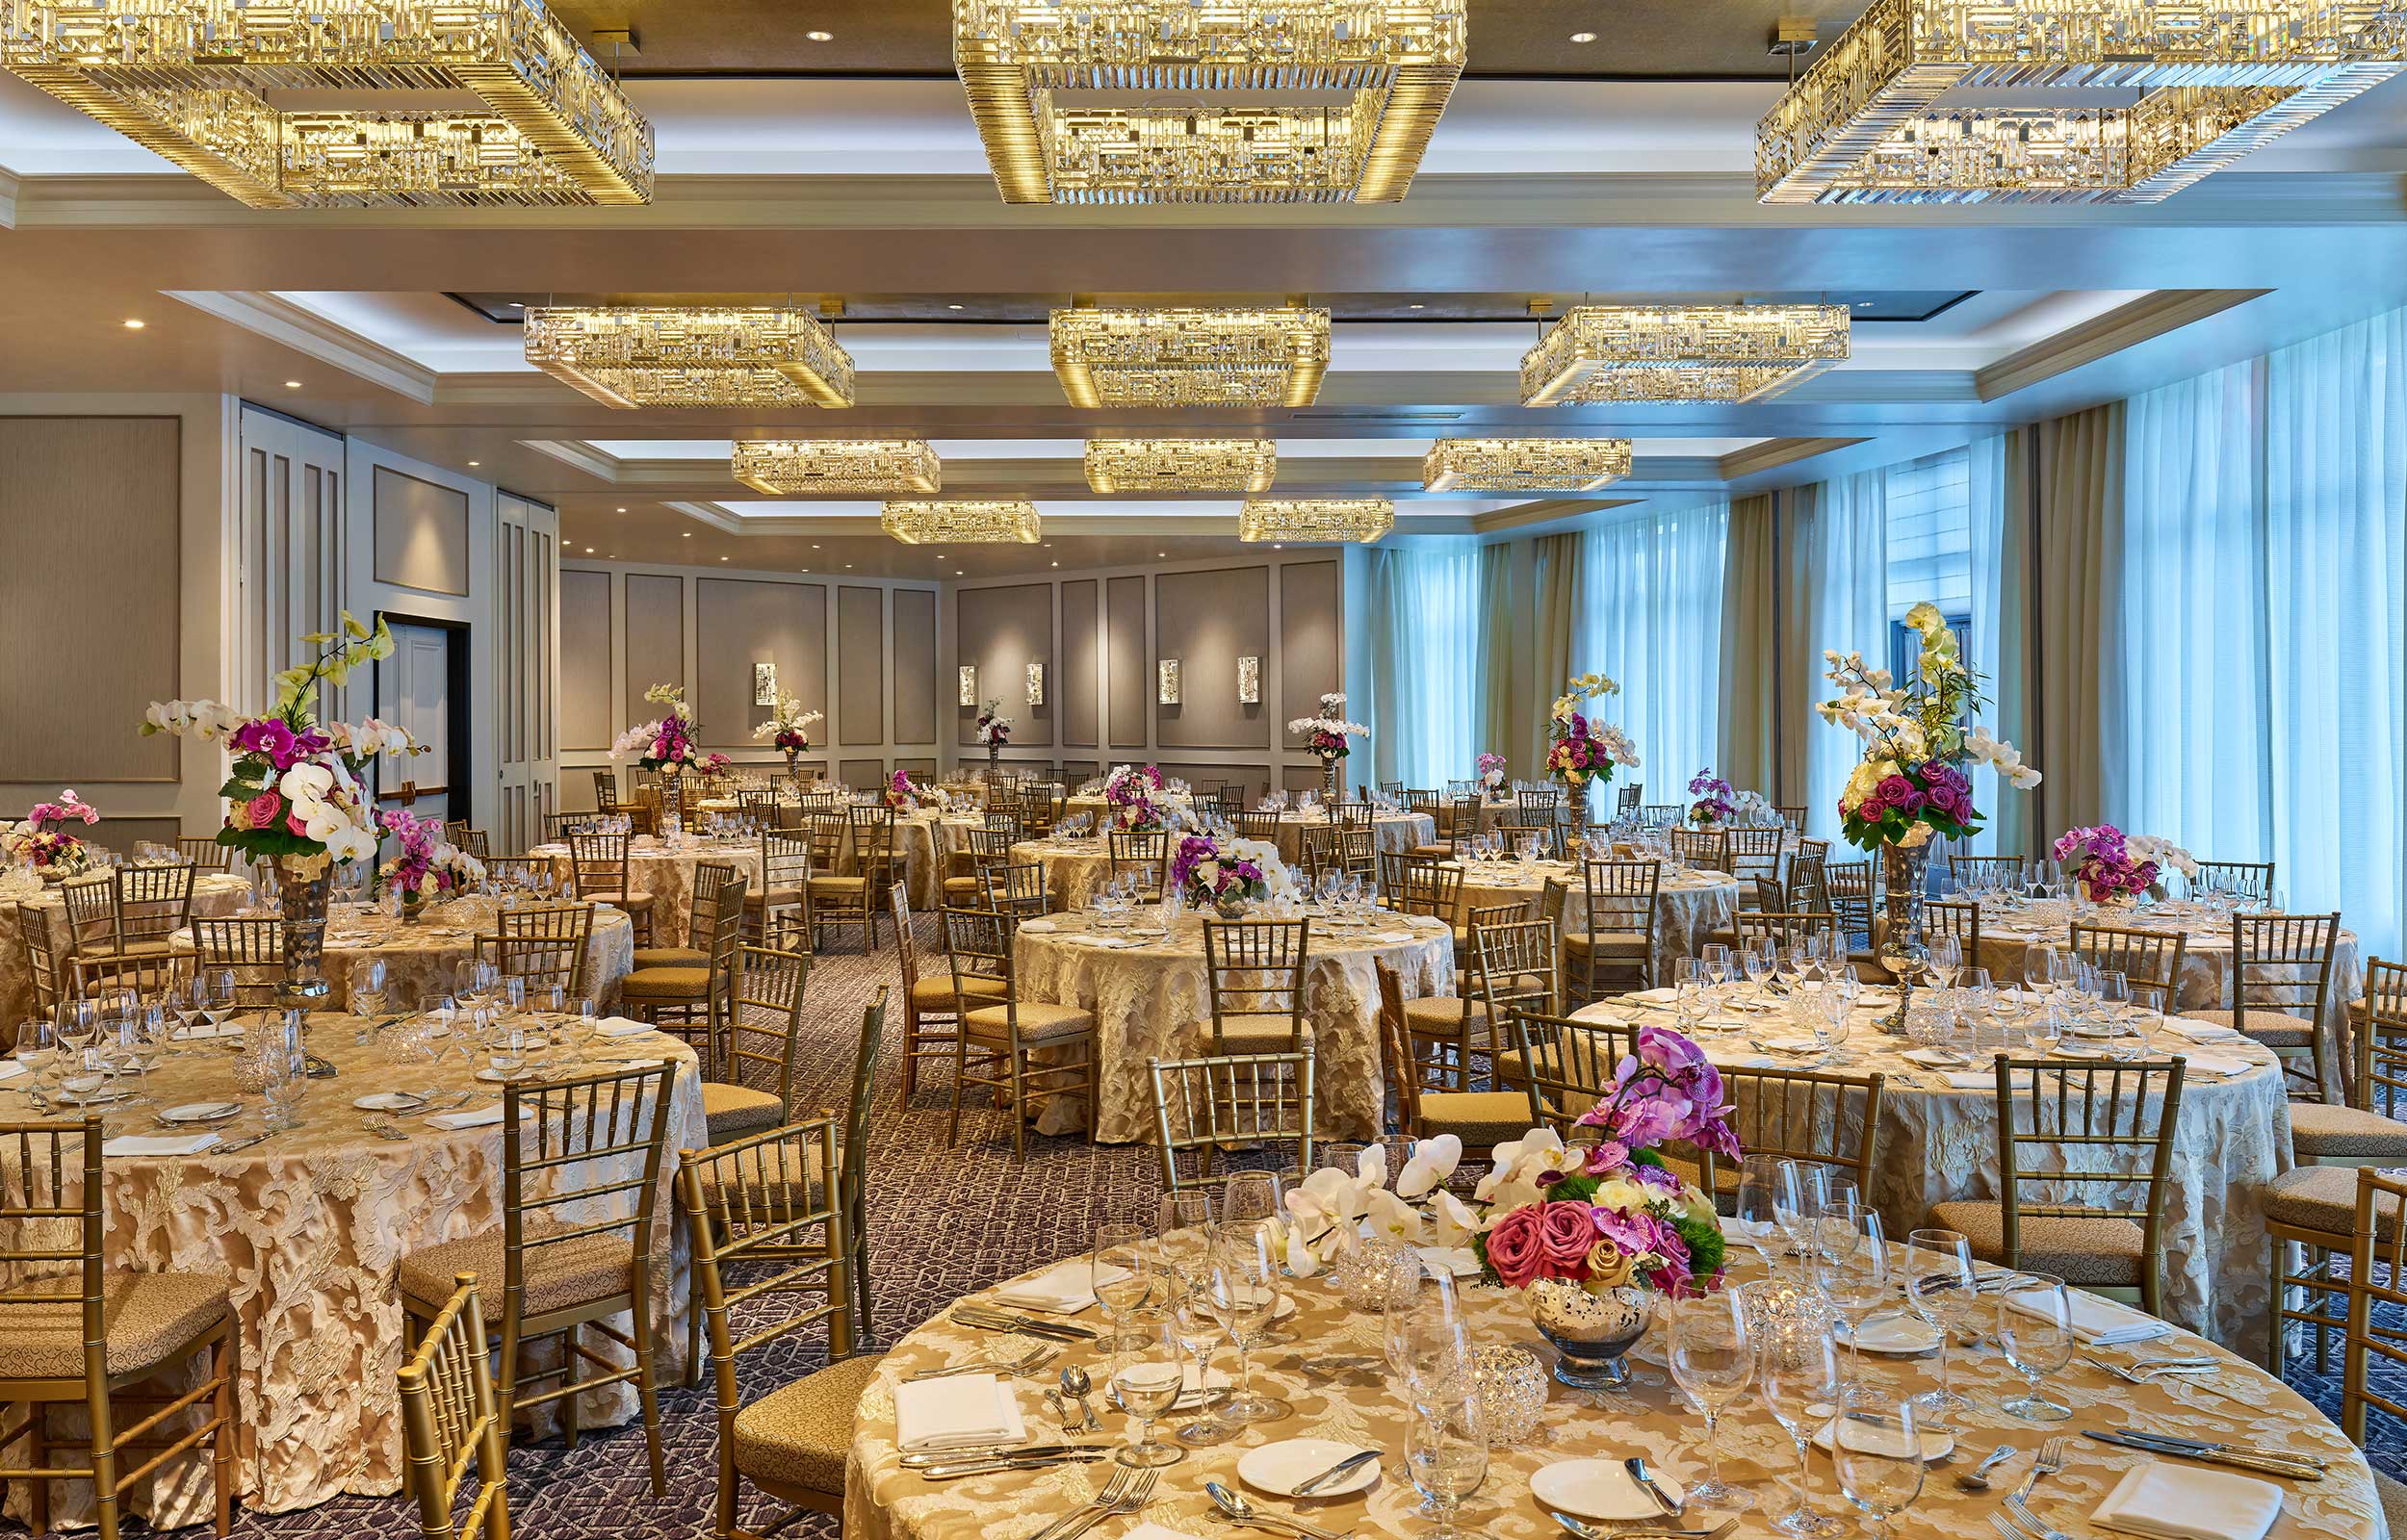 Legacy-Ballroom with gold fixtures